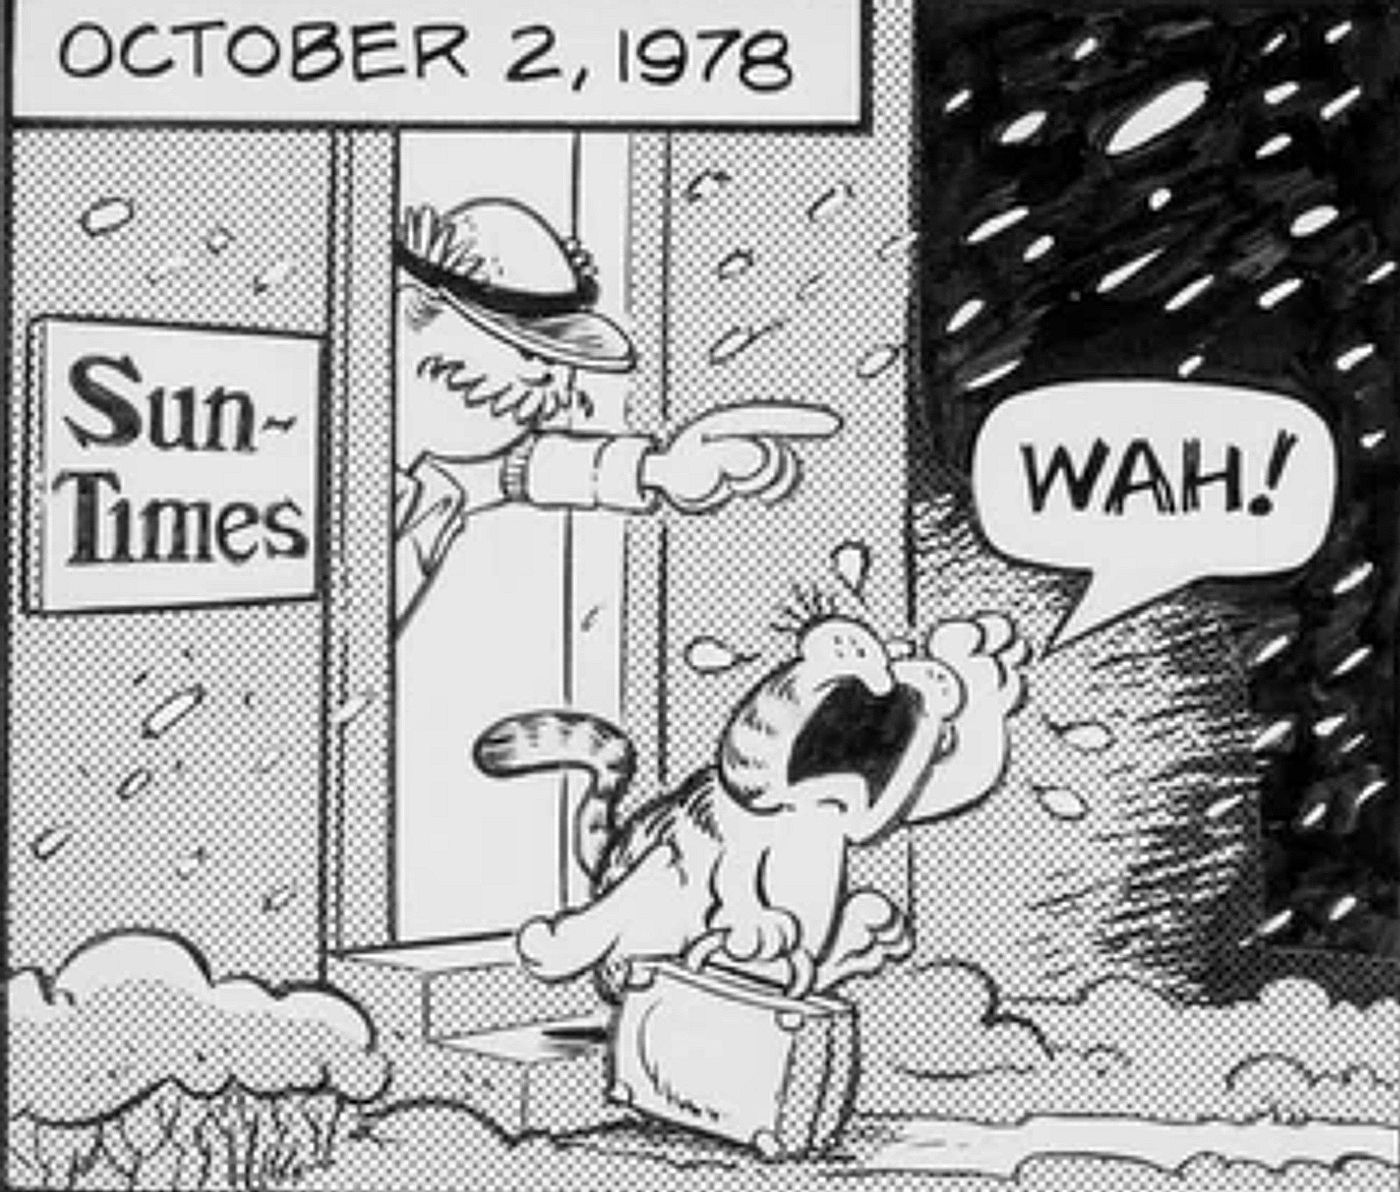 Garfield is dropped by the Chicago Sun-Times on October 2, 1978 (he runs from their offices crying)